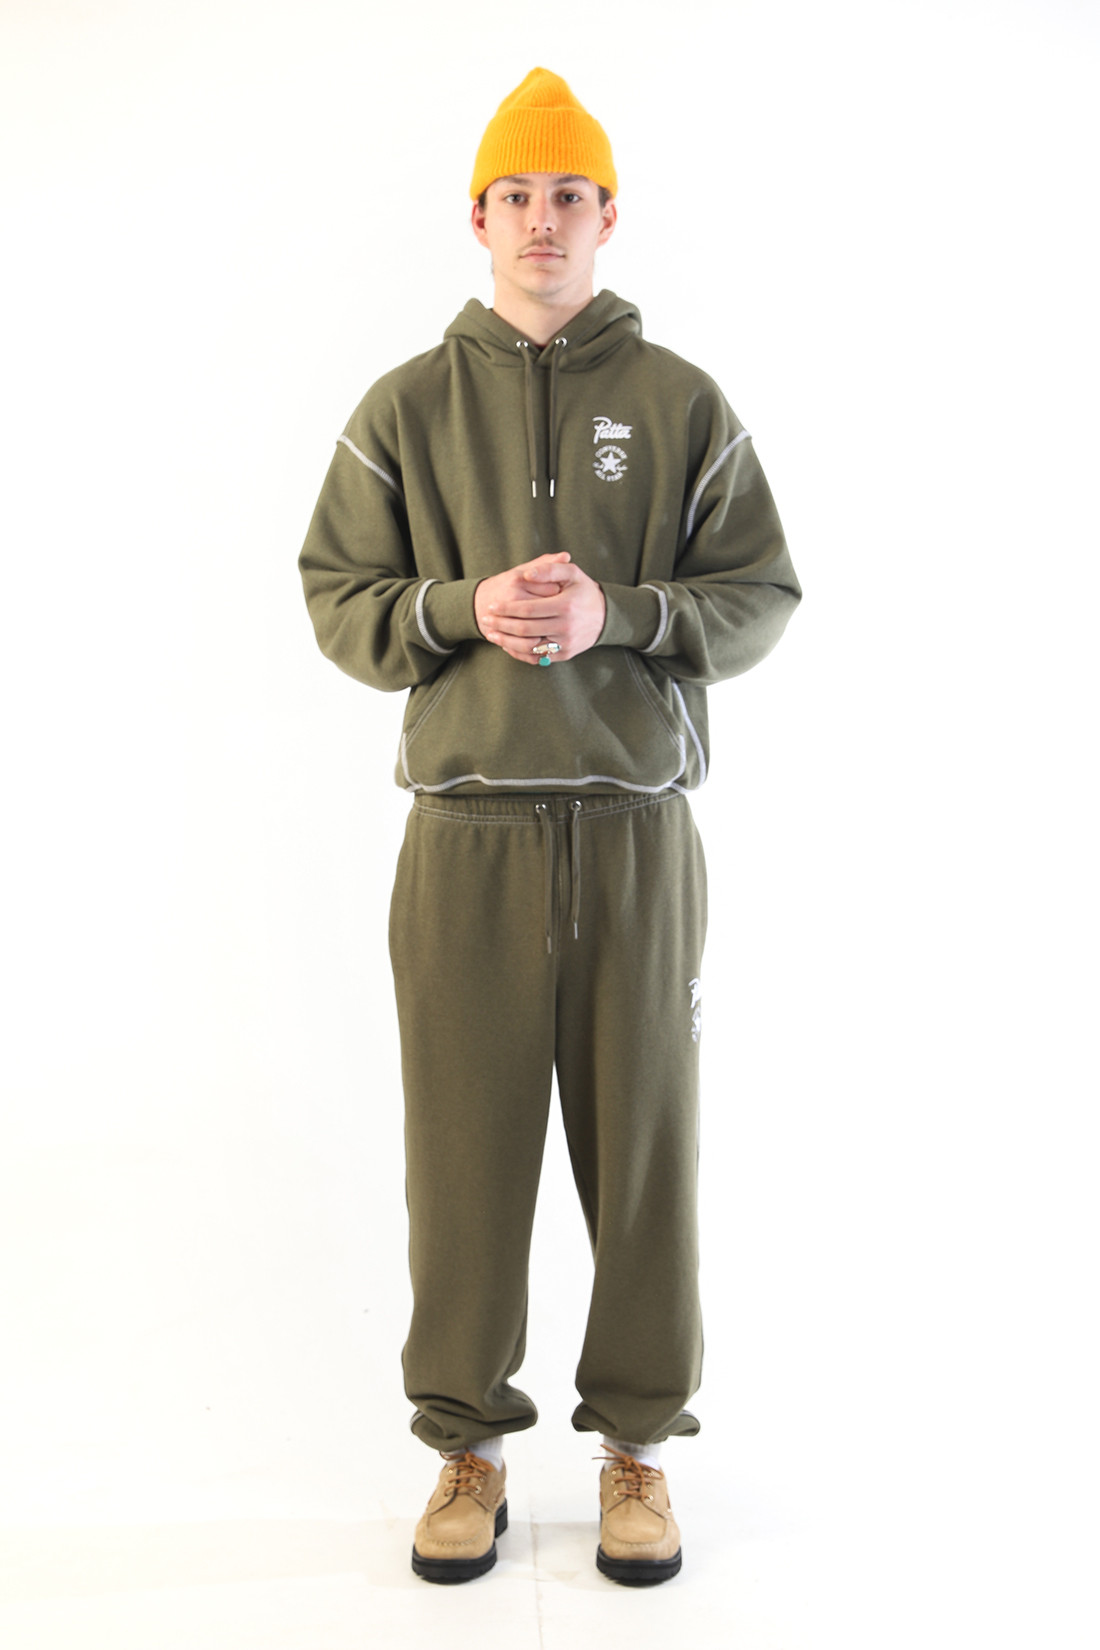 Converse pant utility Green heather